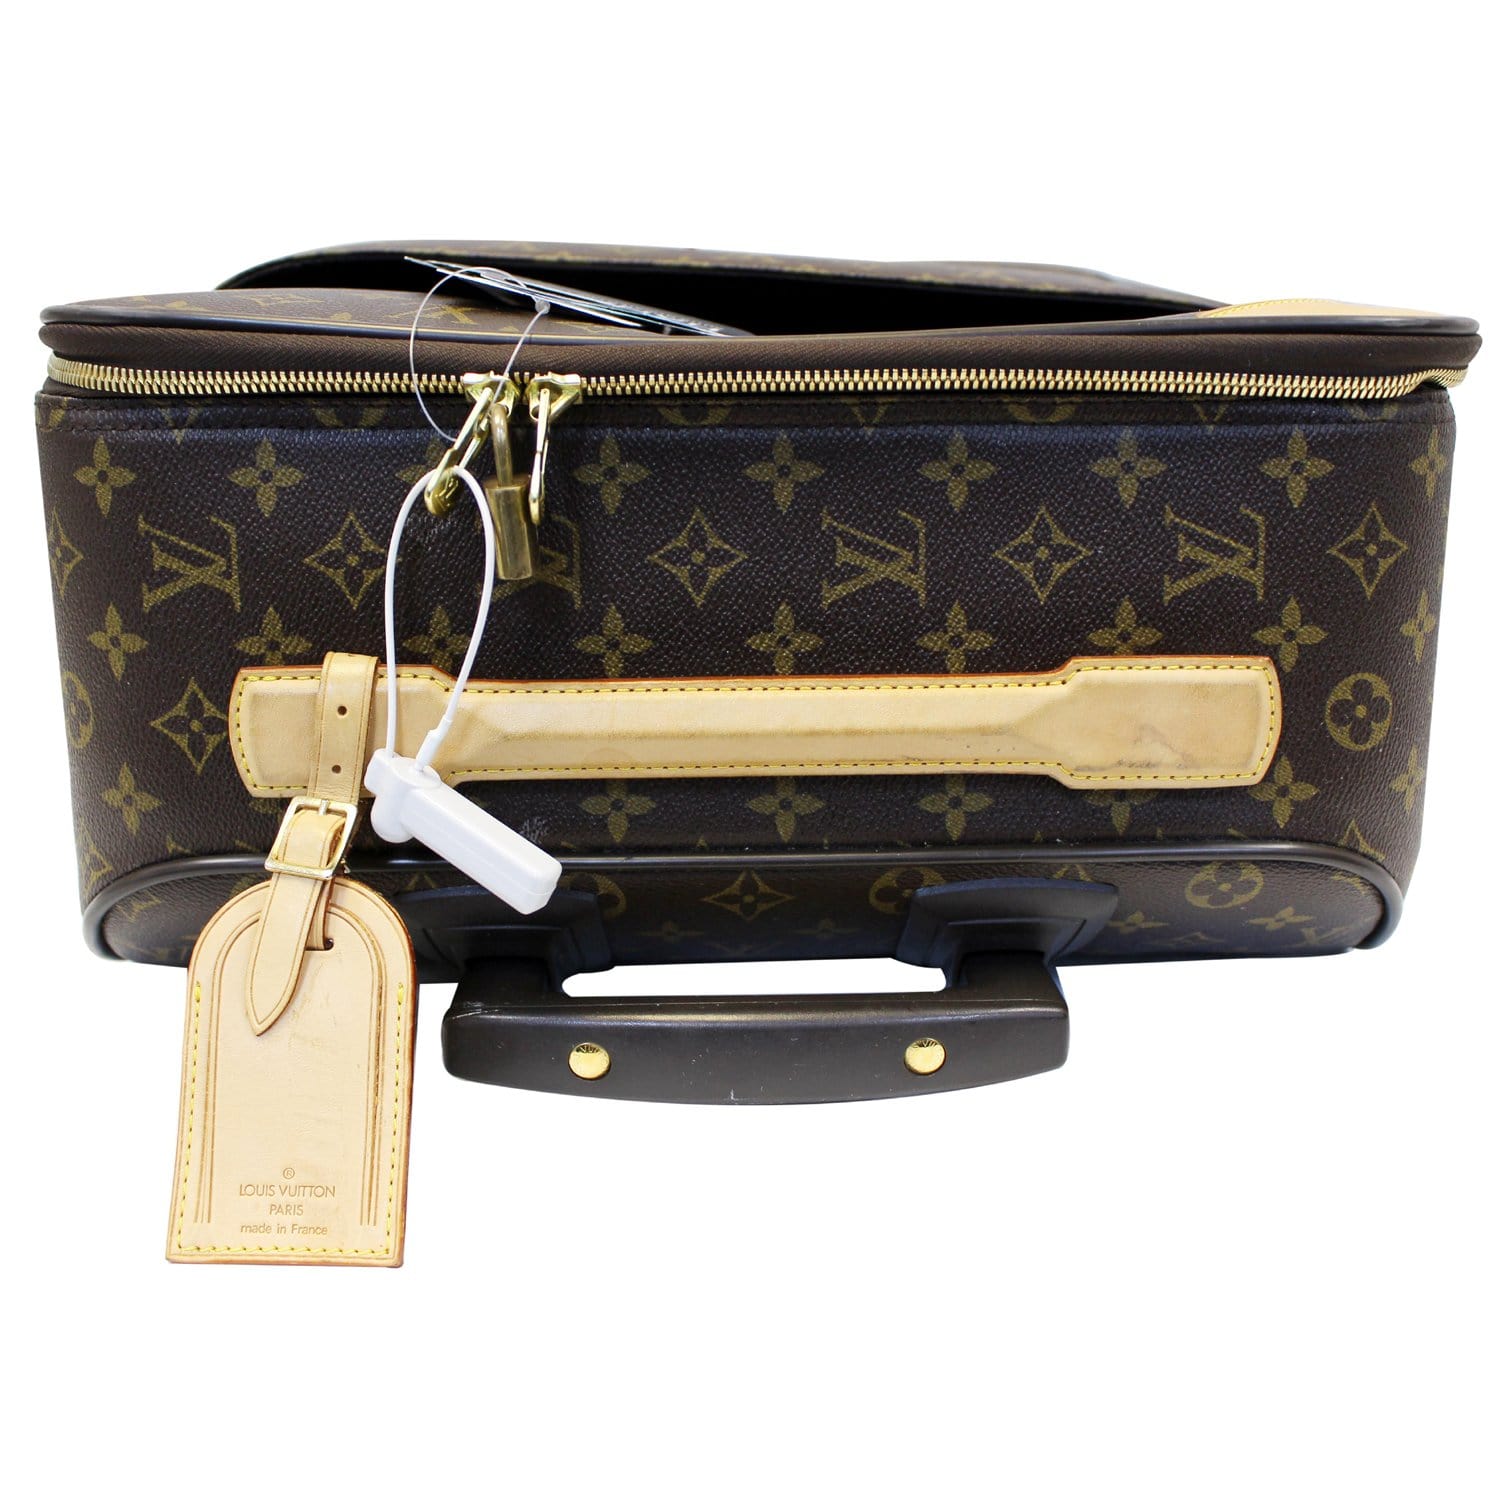 suitcase for louis vuitton luggage for women